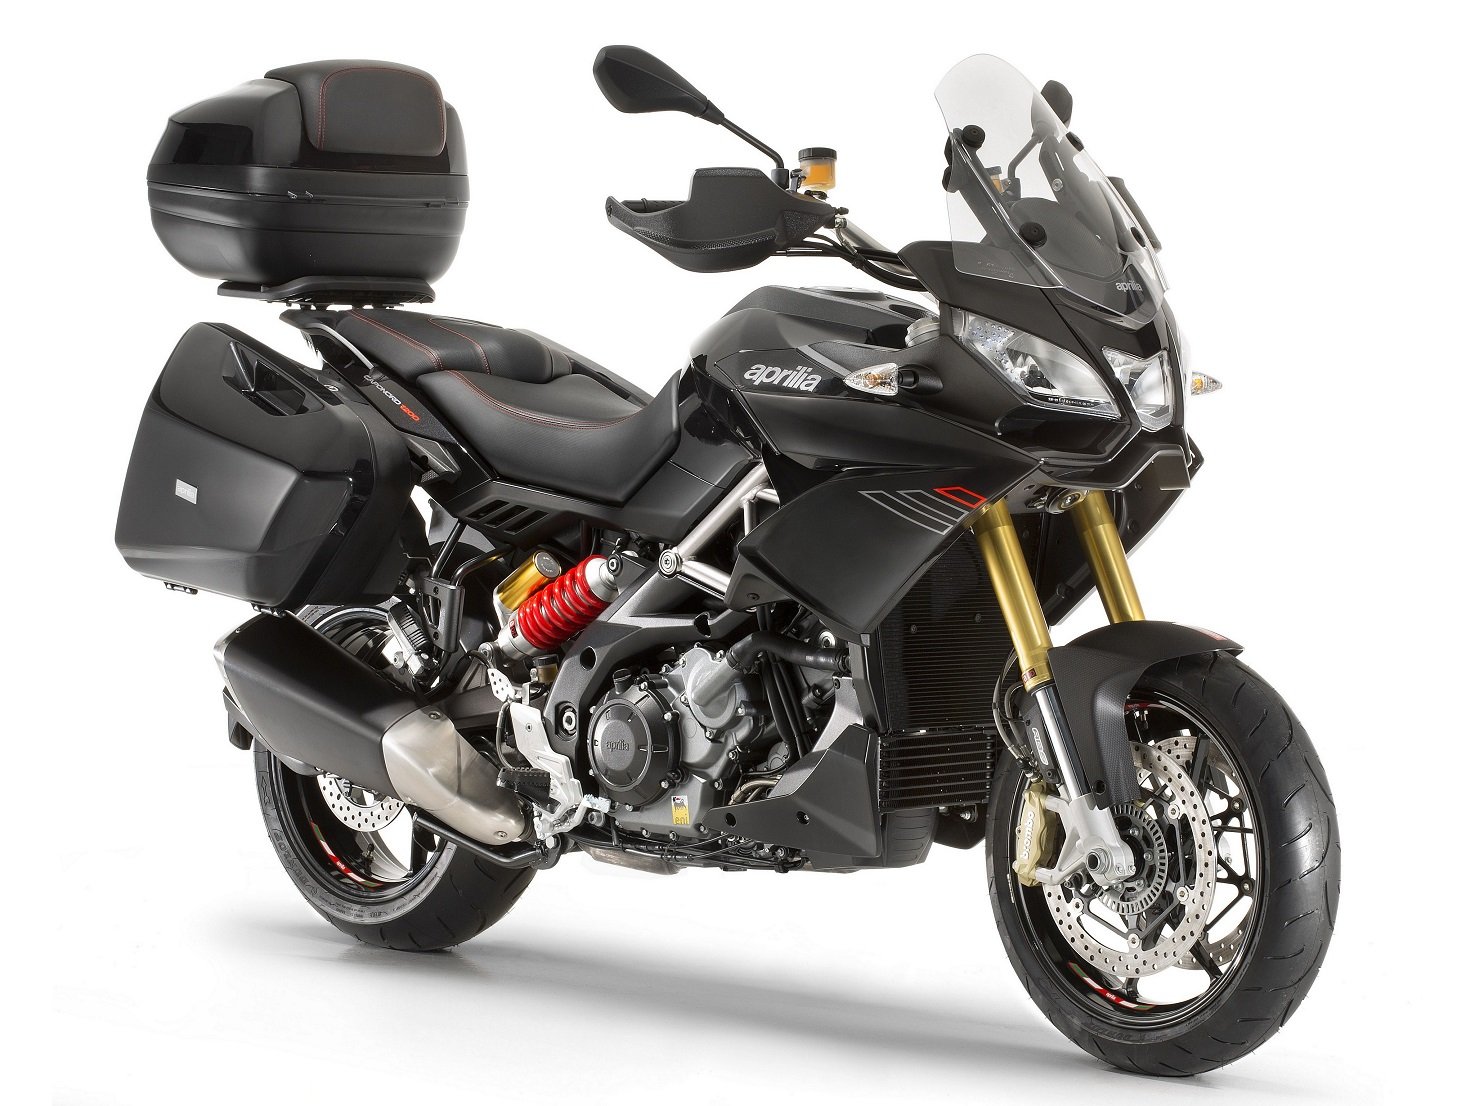 aprilia, Caponord, 1200, Travel, Pack, Motorcycles, 2013 Wallpaper